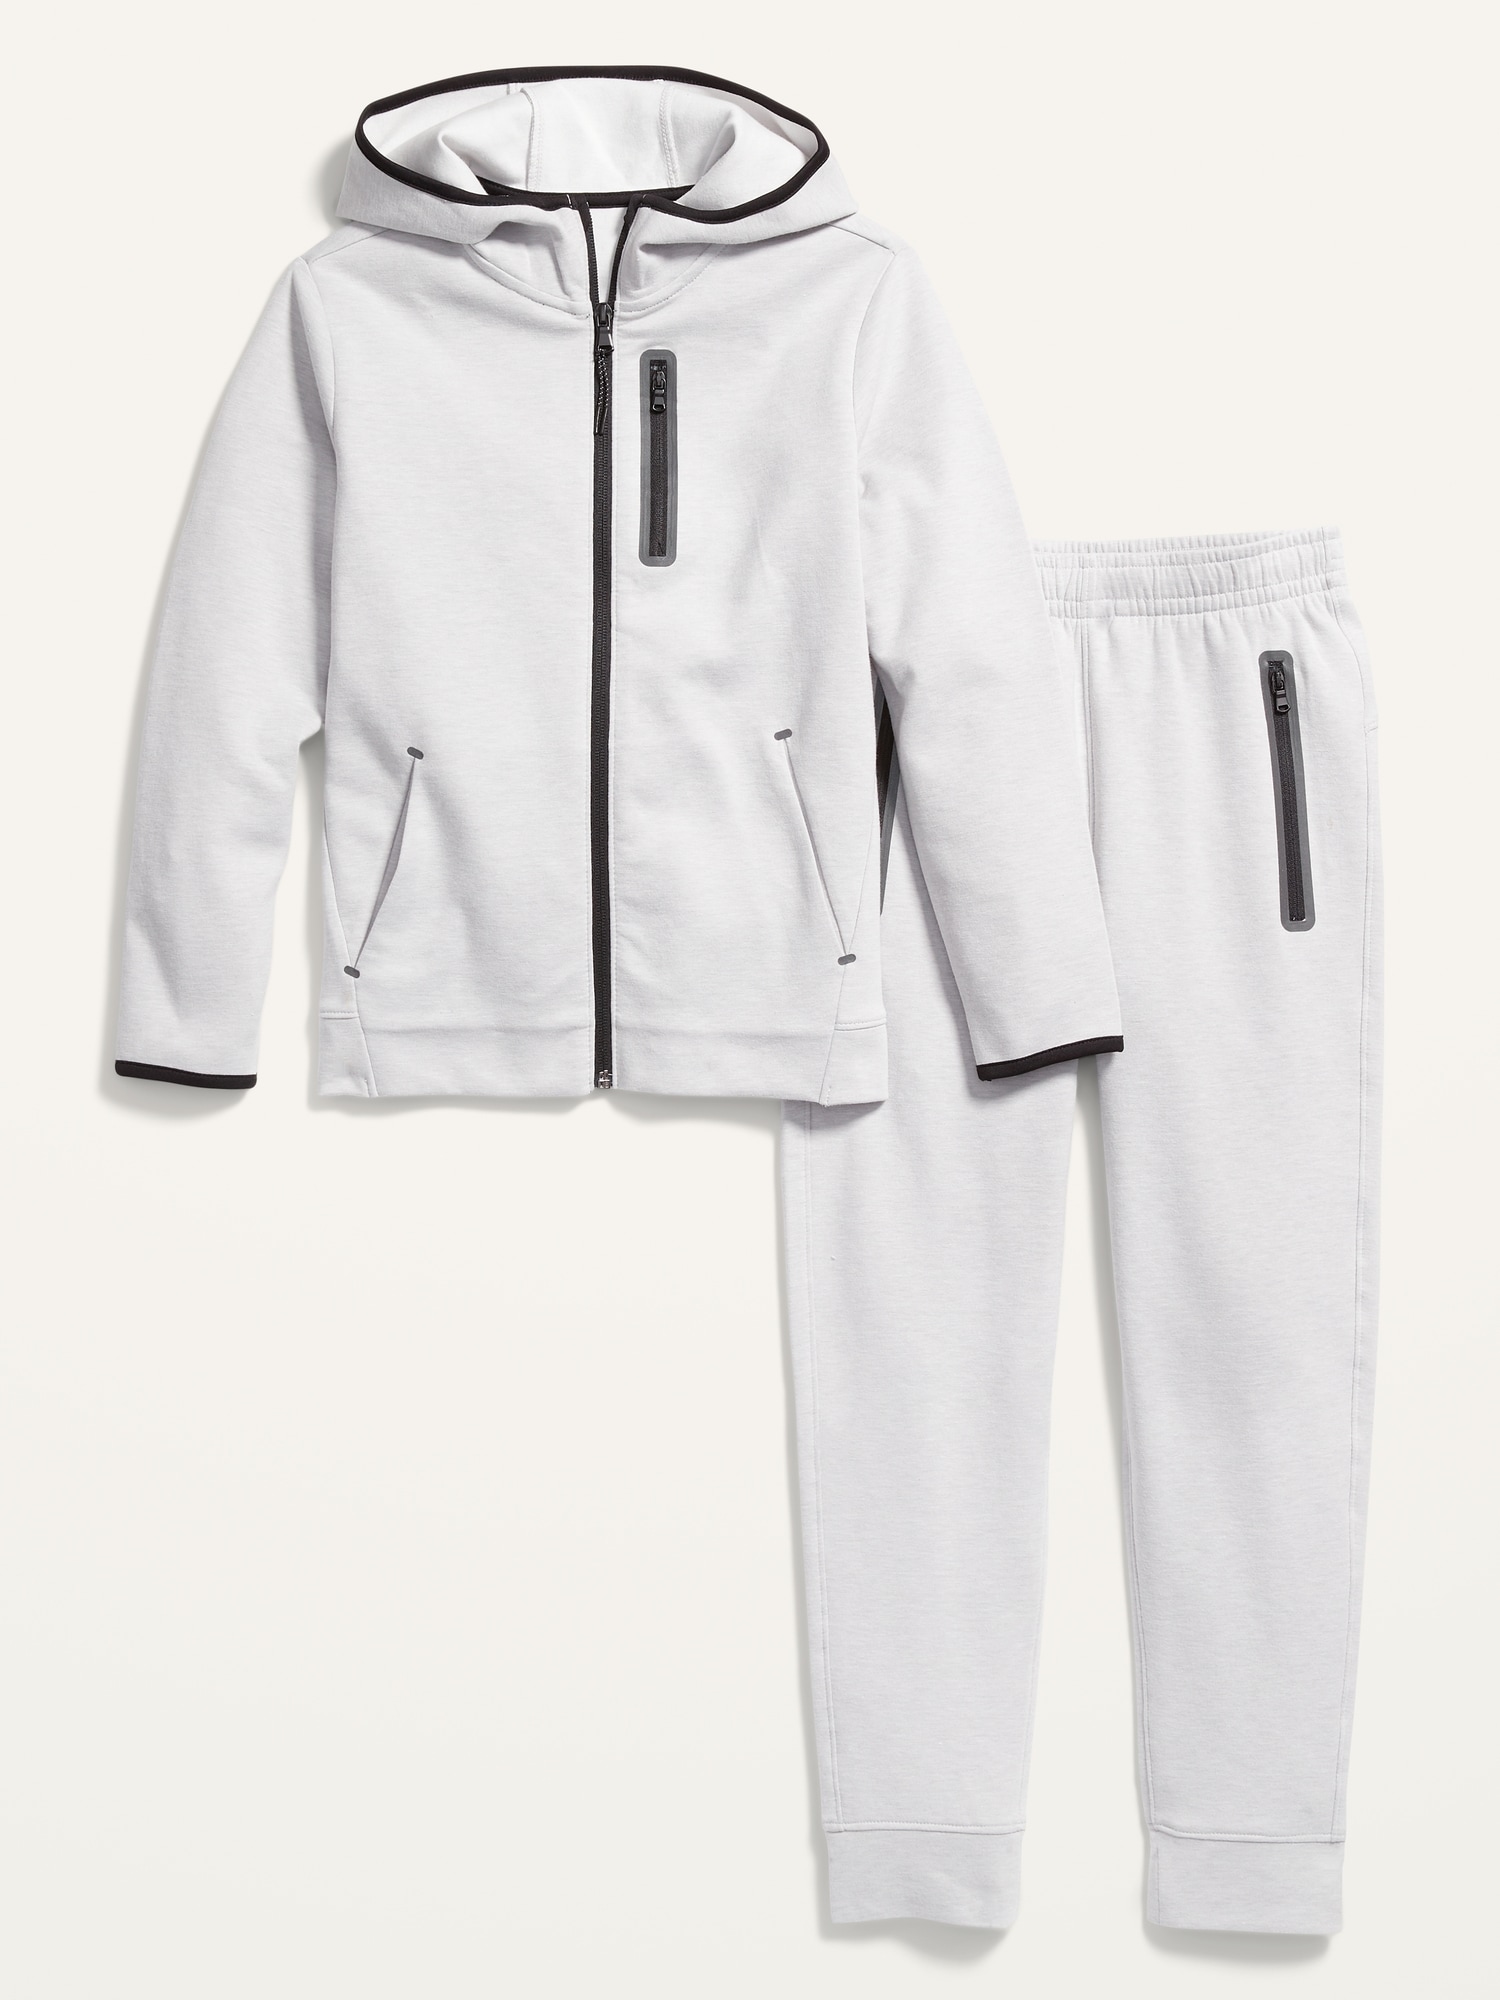 Old Navy Straight Fleece Sweatpants for Boys  Yorkdale Mall